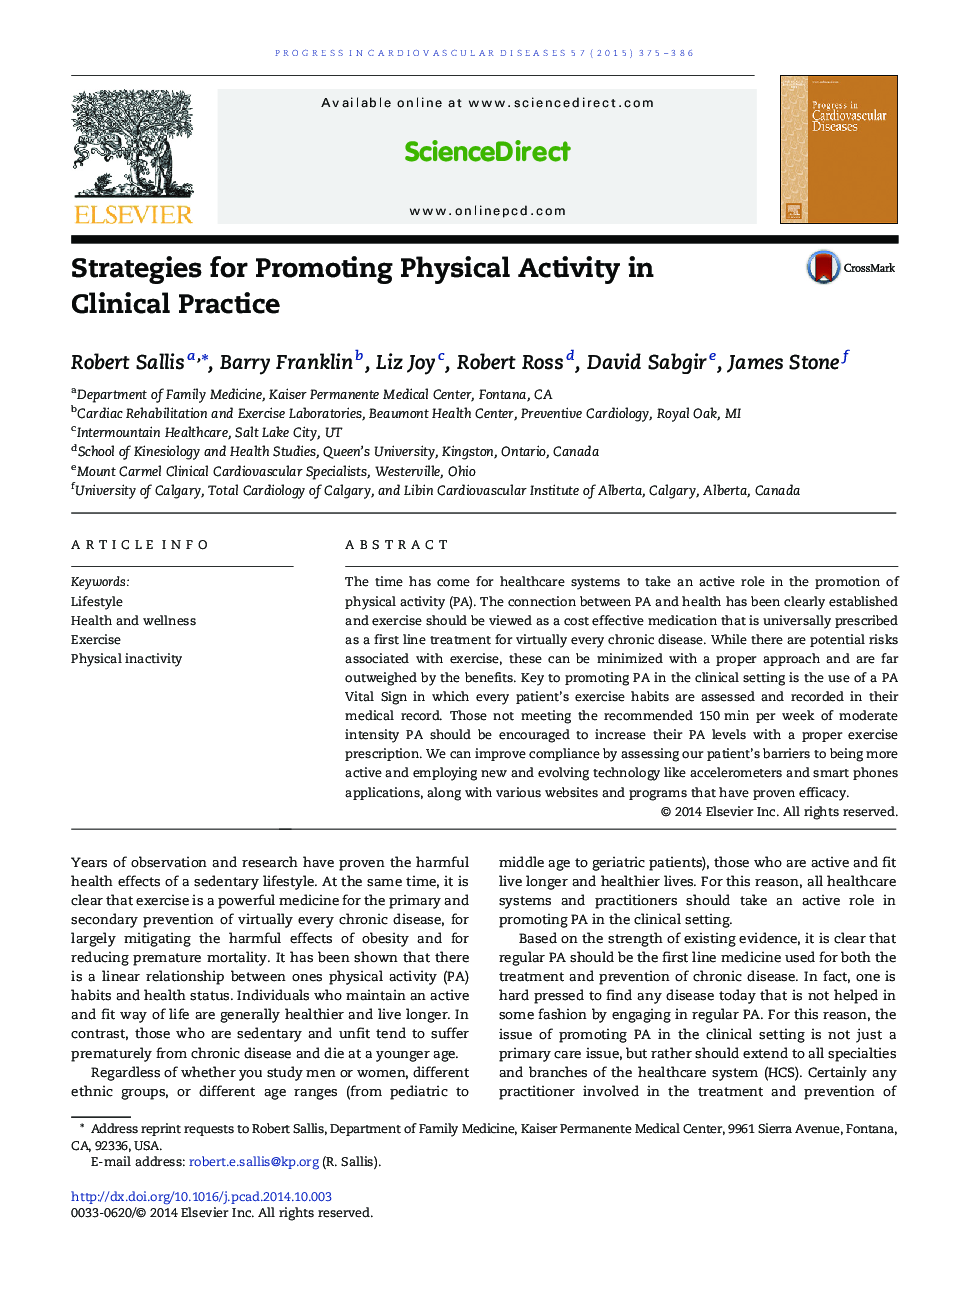 Strategies for Promoting Physical Activity in Clinical Practice